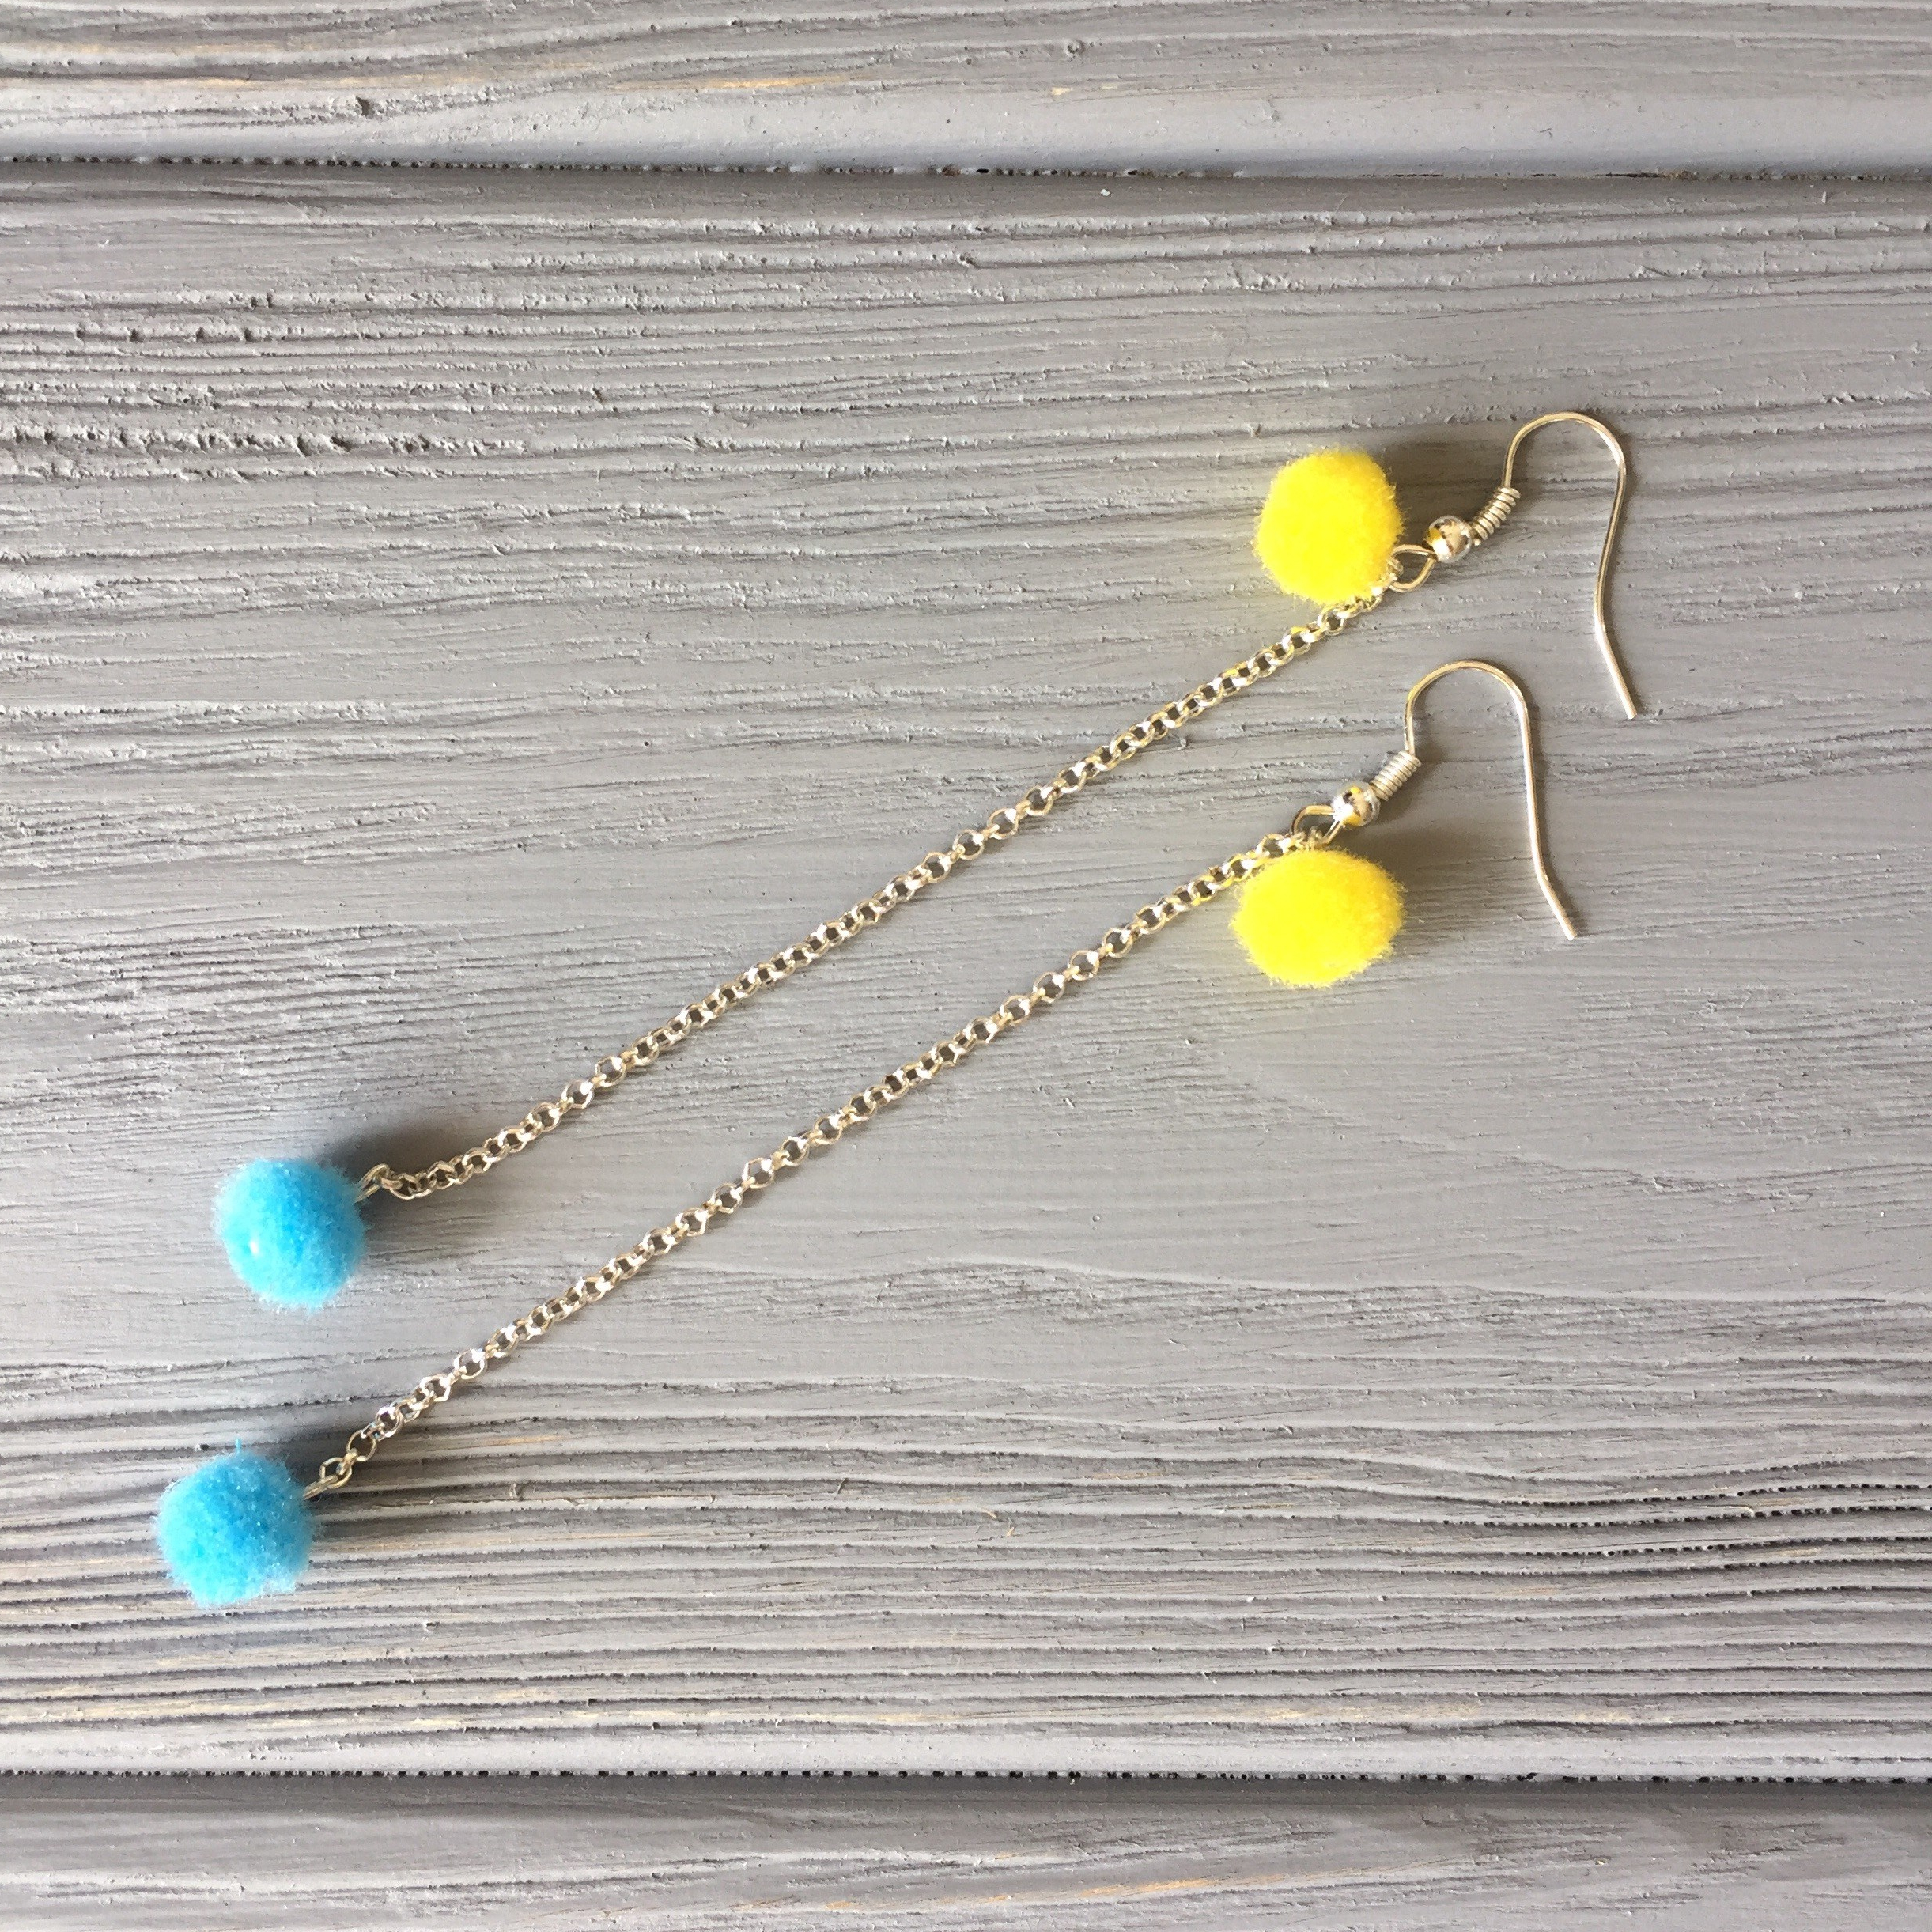 Two pompoms attached to the chain of future earrings